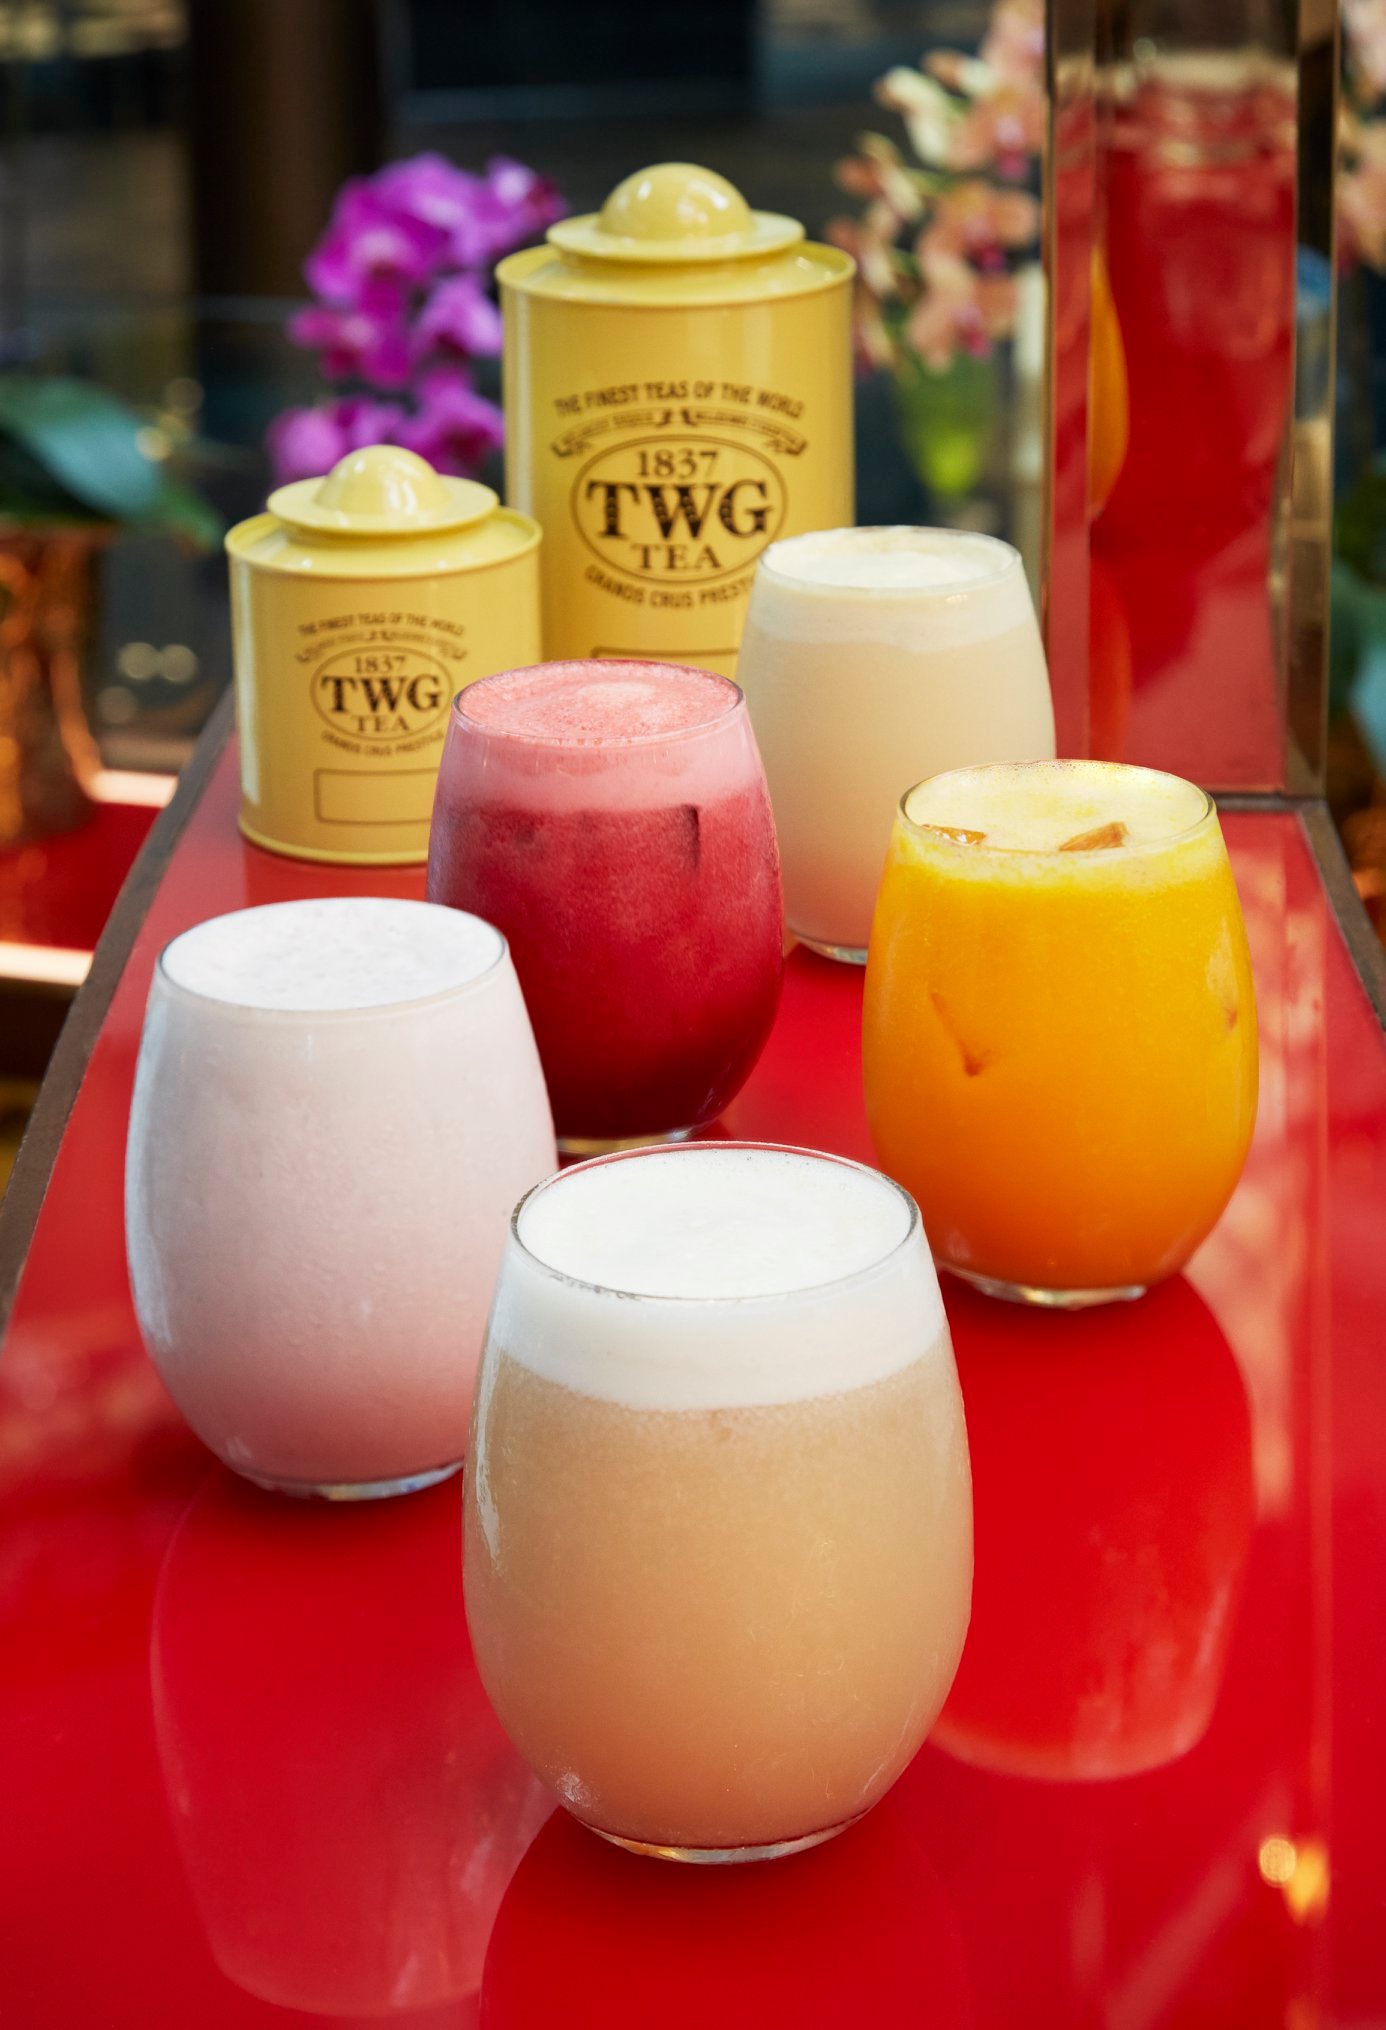 Delight in TWG Tea’s unparalleled range of tea-infused mocktails, flavourfully infused with the finest selection of hand-picked and beautifully harvested teas. With inspirations and concoctions stemming from our exquisite tea blends, there is no better way to pamper and refresh your palate!